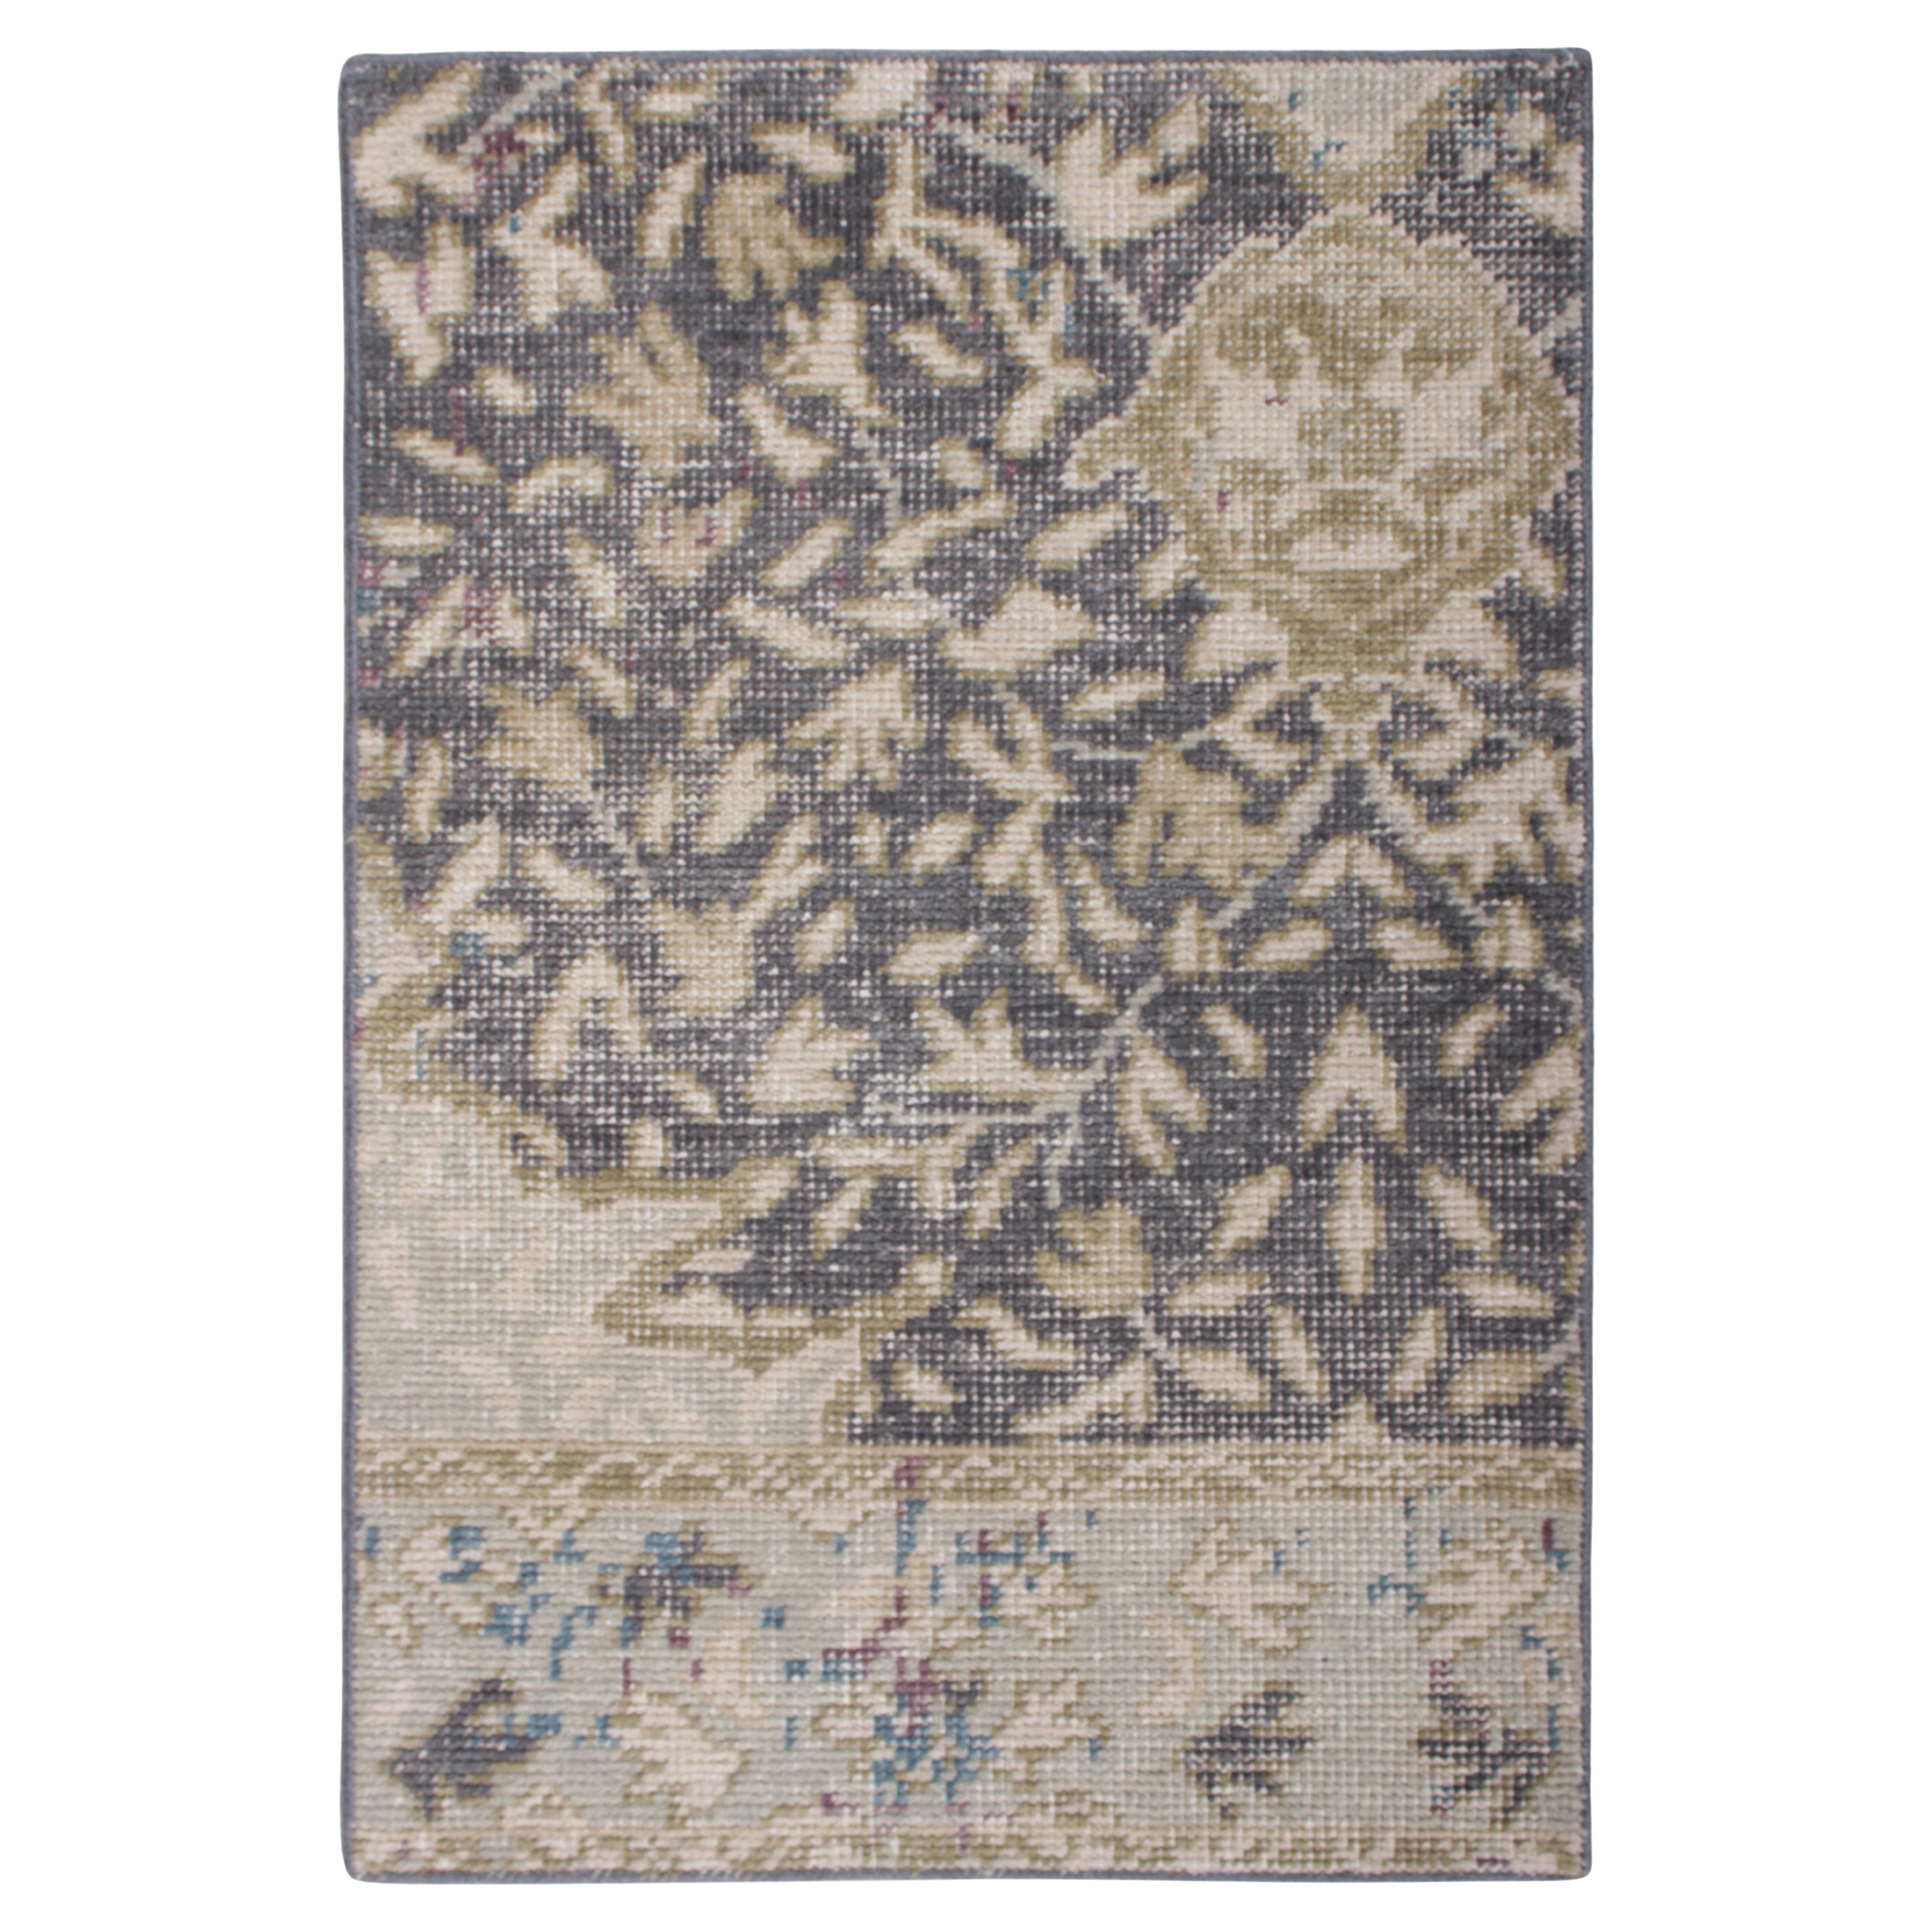 Rug & Kilim’s Distressed Style Gift-Size Rug in Blue, Beige-Brown Floral Pattern For Sale